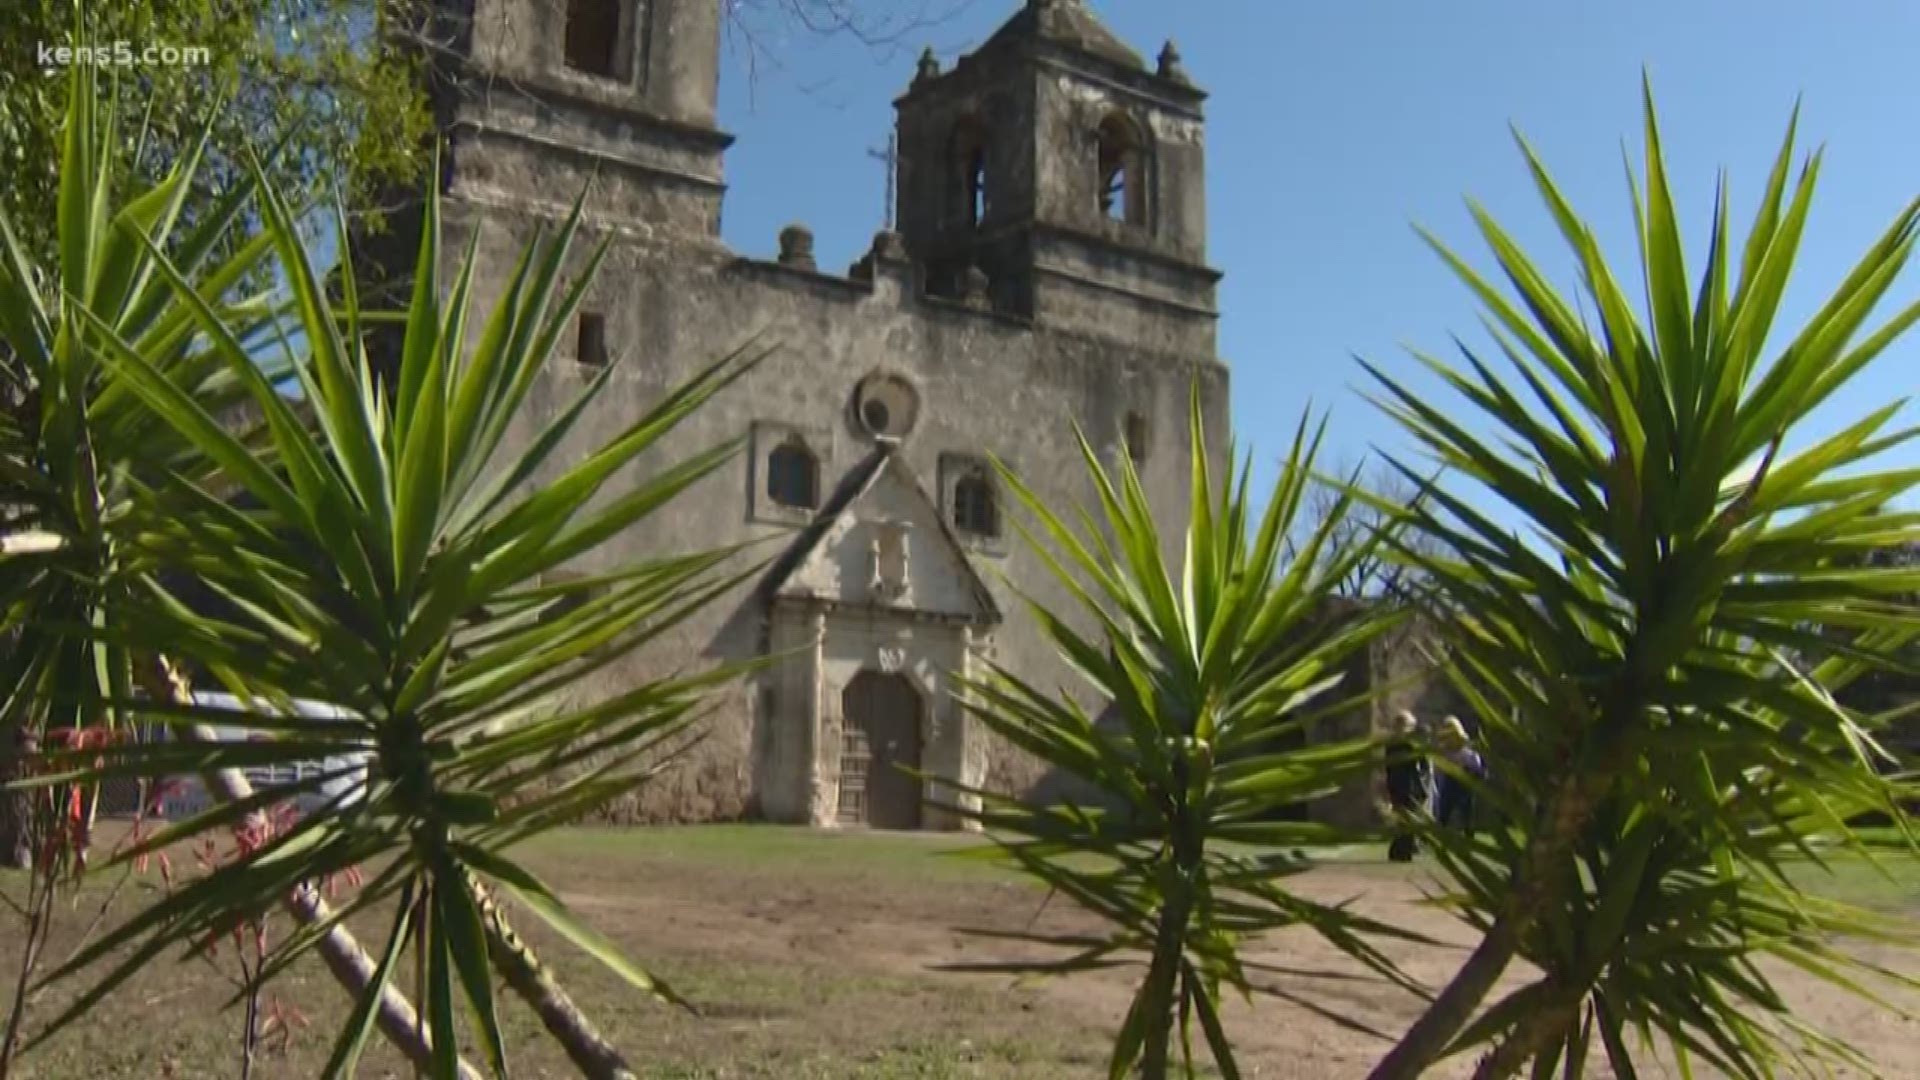 Crews are working hard to make repairs to Mission Concepcion-- one of the four mission churches that make up our World Heritage sites.